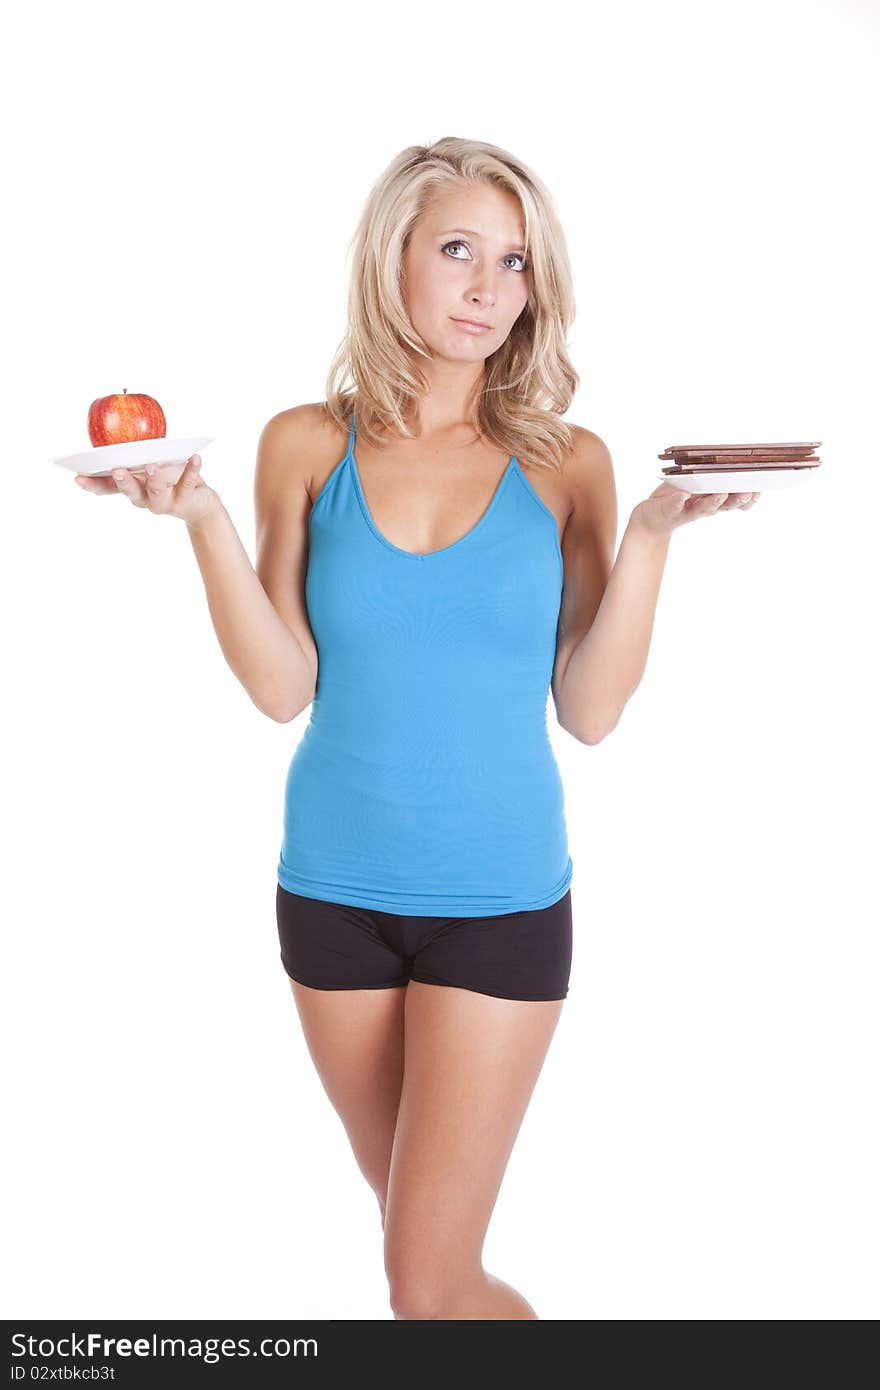 A woman is trying to decide between eating chocolate, or fruit. A woman is trying to decide between eating chocolate, or fruit.